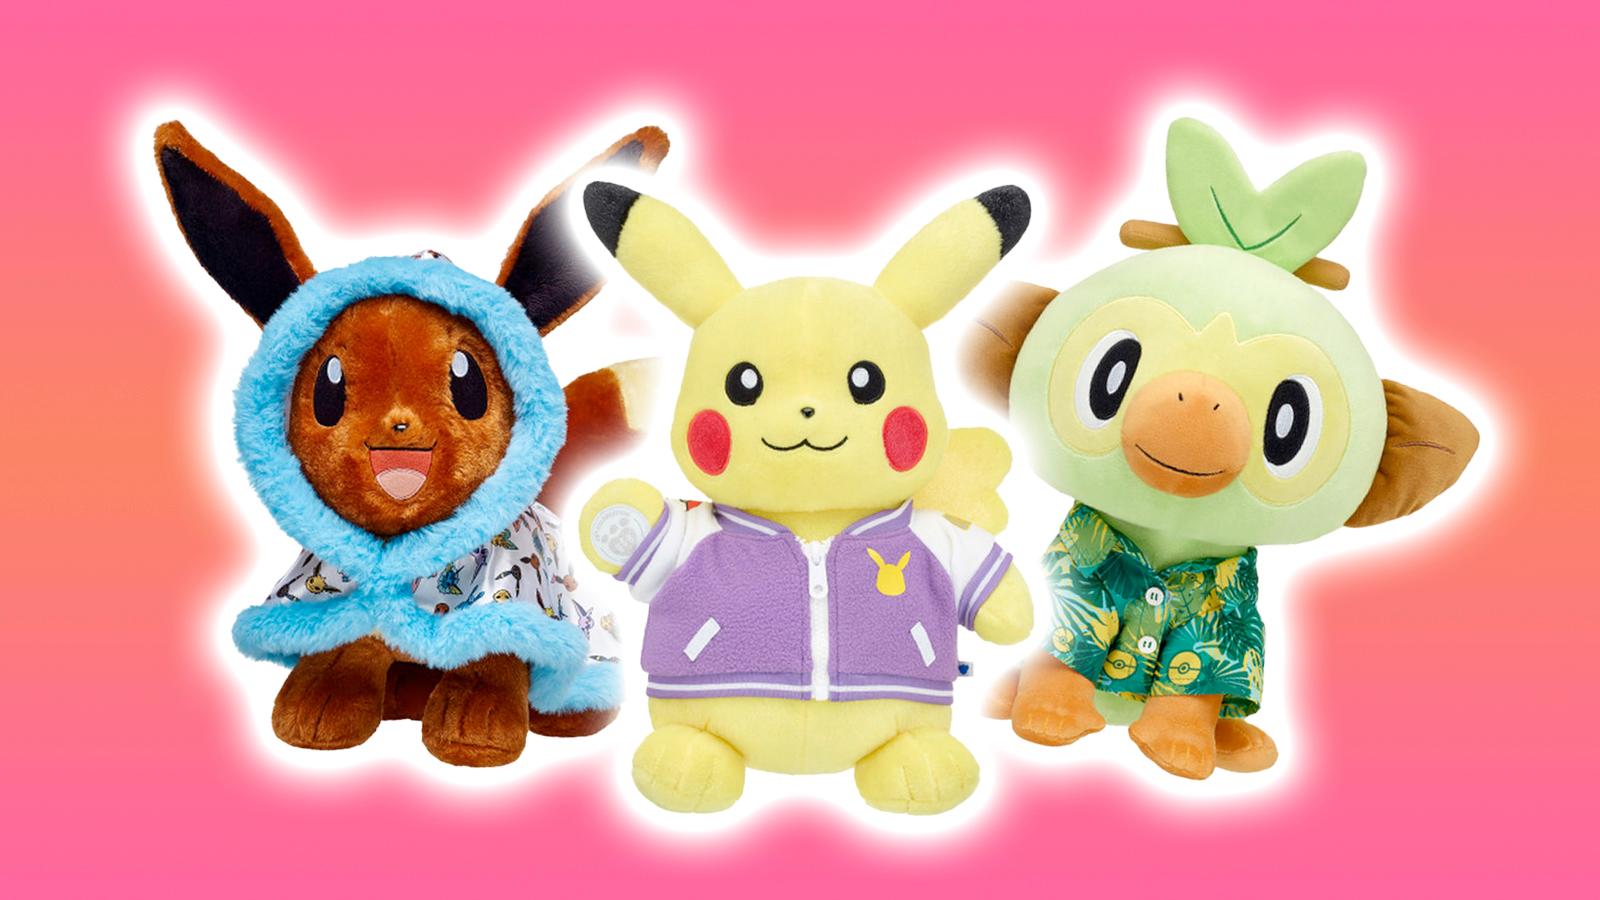 eevee, pikachu, grookey build-a-bear plushes on a pink and orange background with outer glow around them